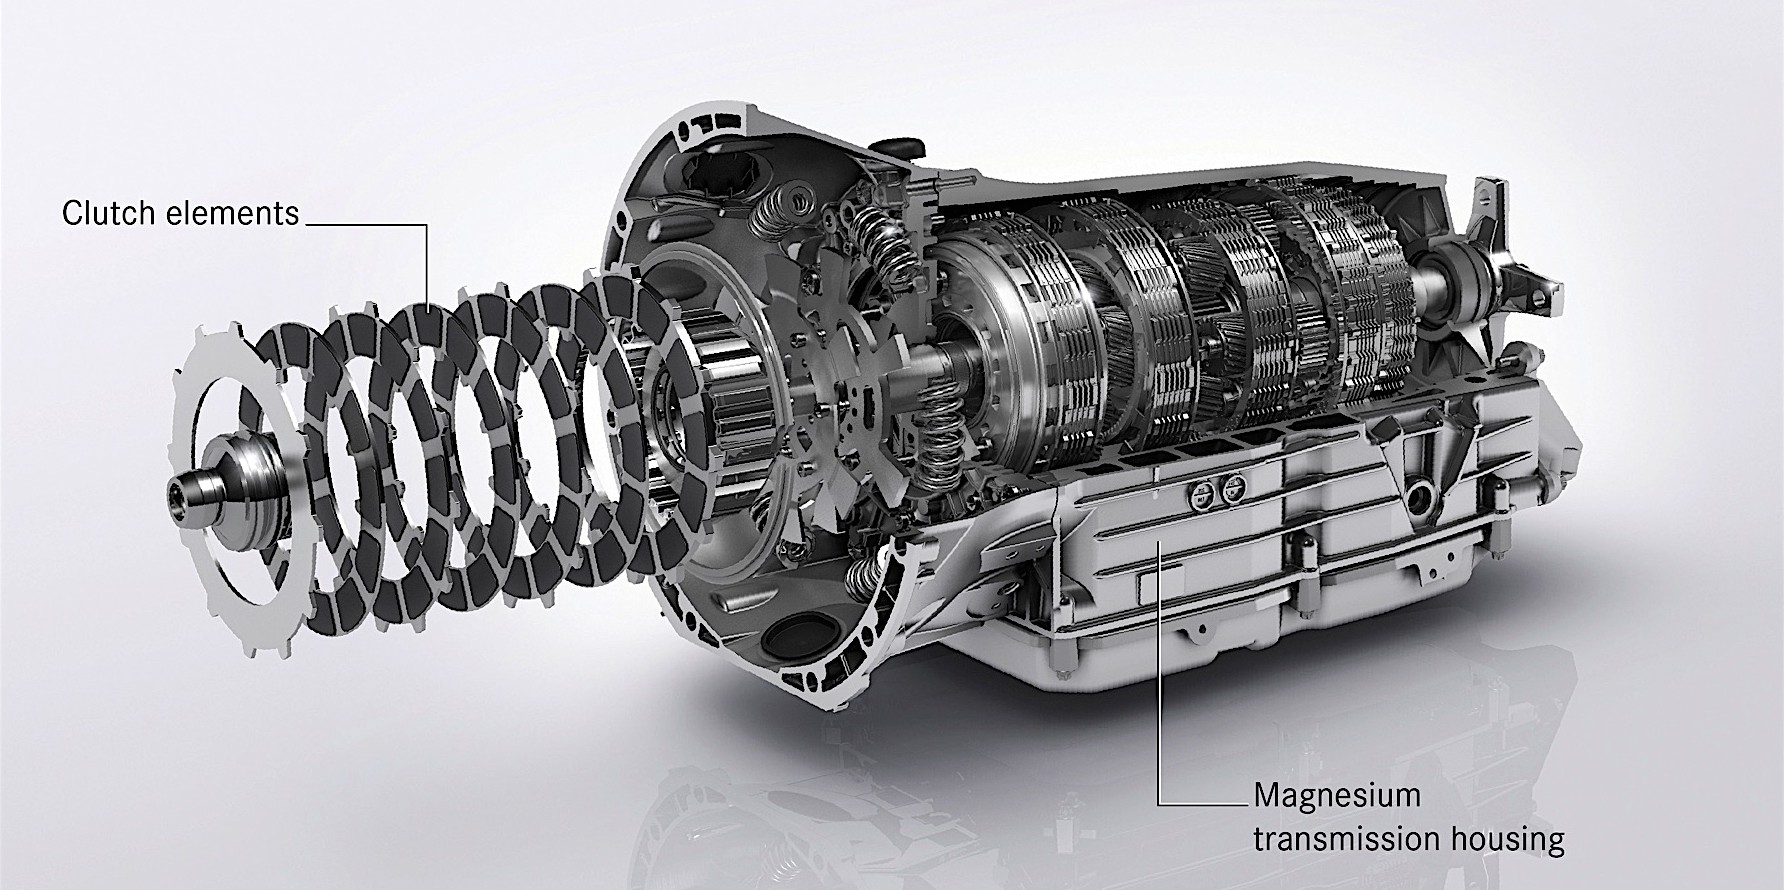 Mercedes Amg S Mct Transmission Explained In Layman S Terms Autoevolution